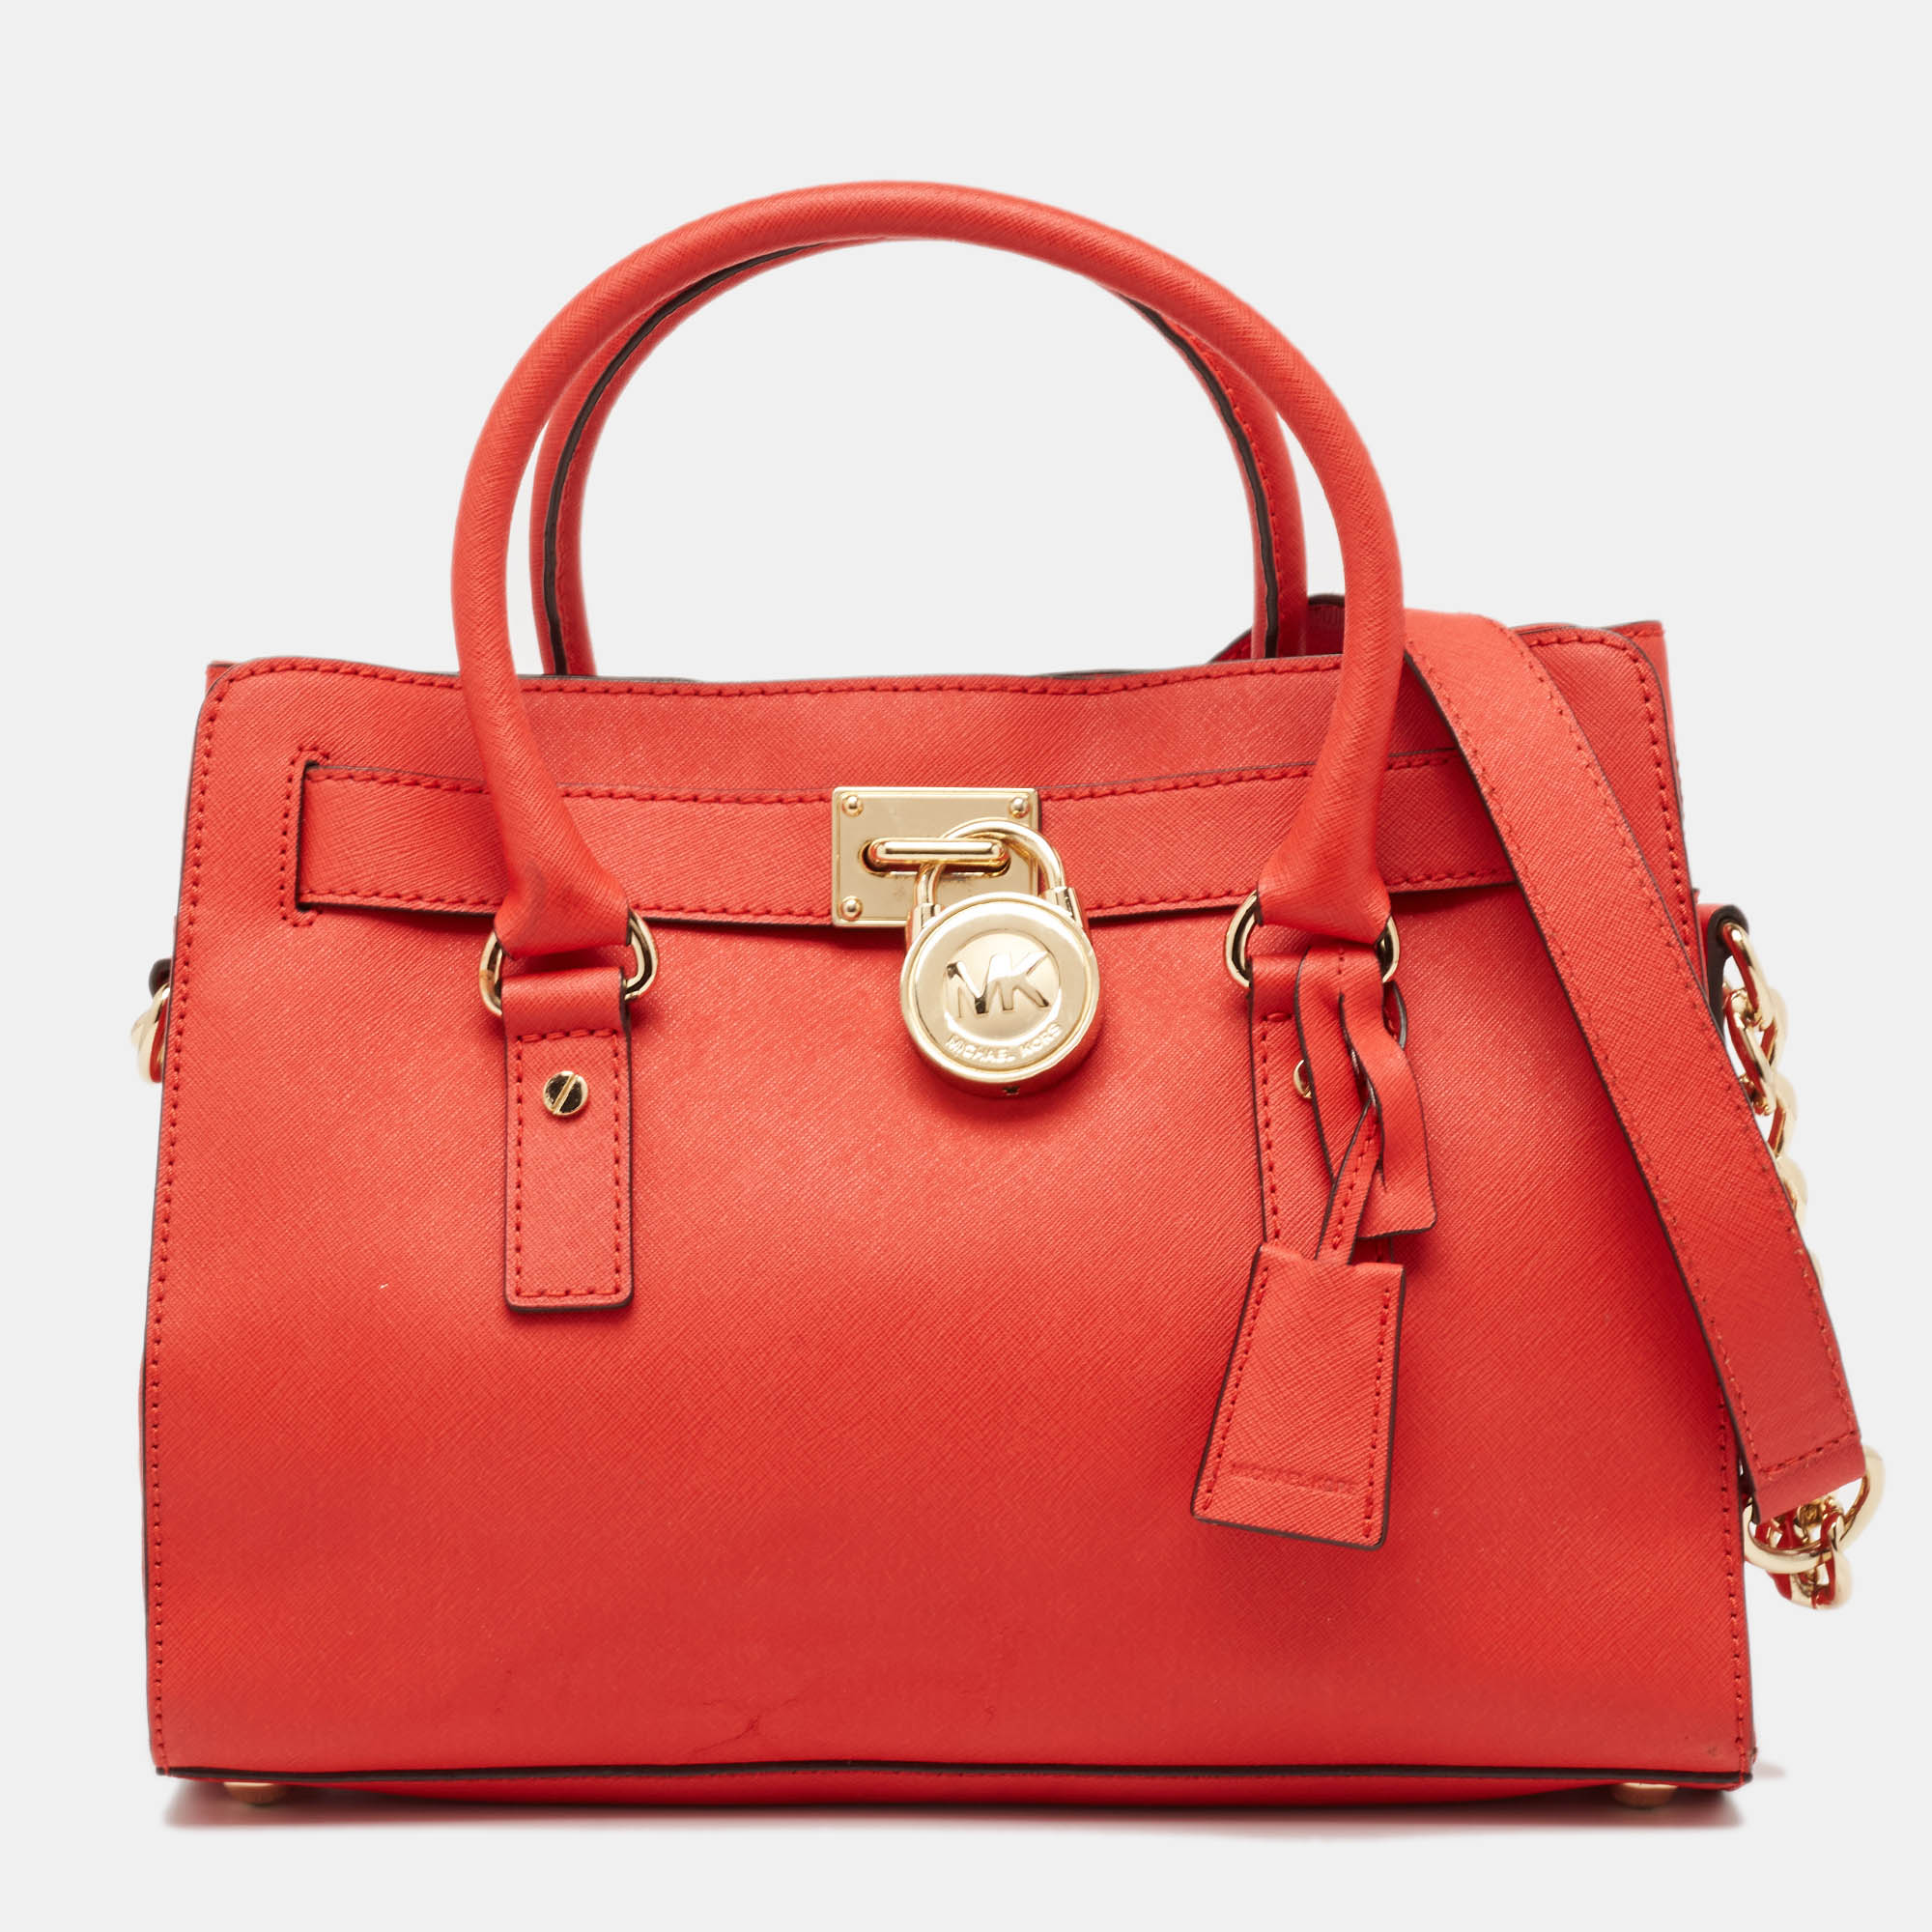 Michael kors micheal kors red saffiano leather east/west hamilton tote